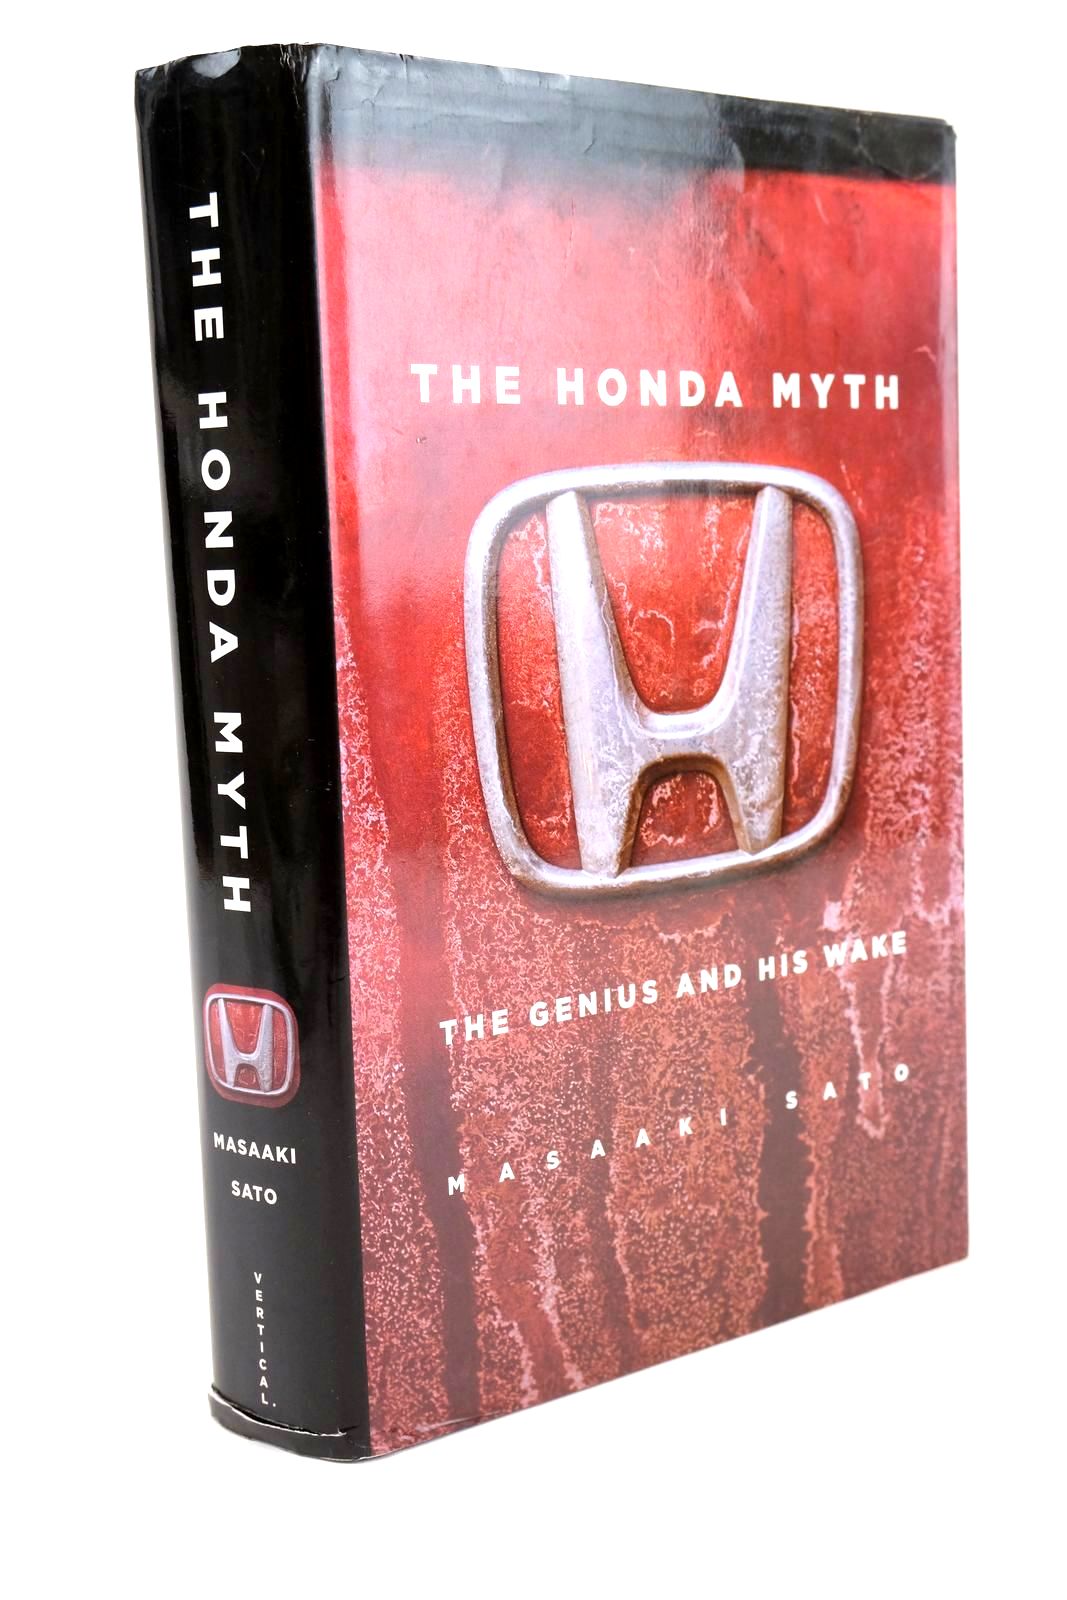 Photo of THE HONDA MYTH written by Sato, Masaaki published by Vertical, Inc. (STOCK CODE: 1324207)  for sale by Stella & Rose's Books